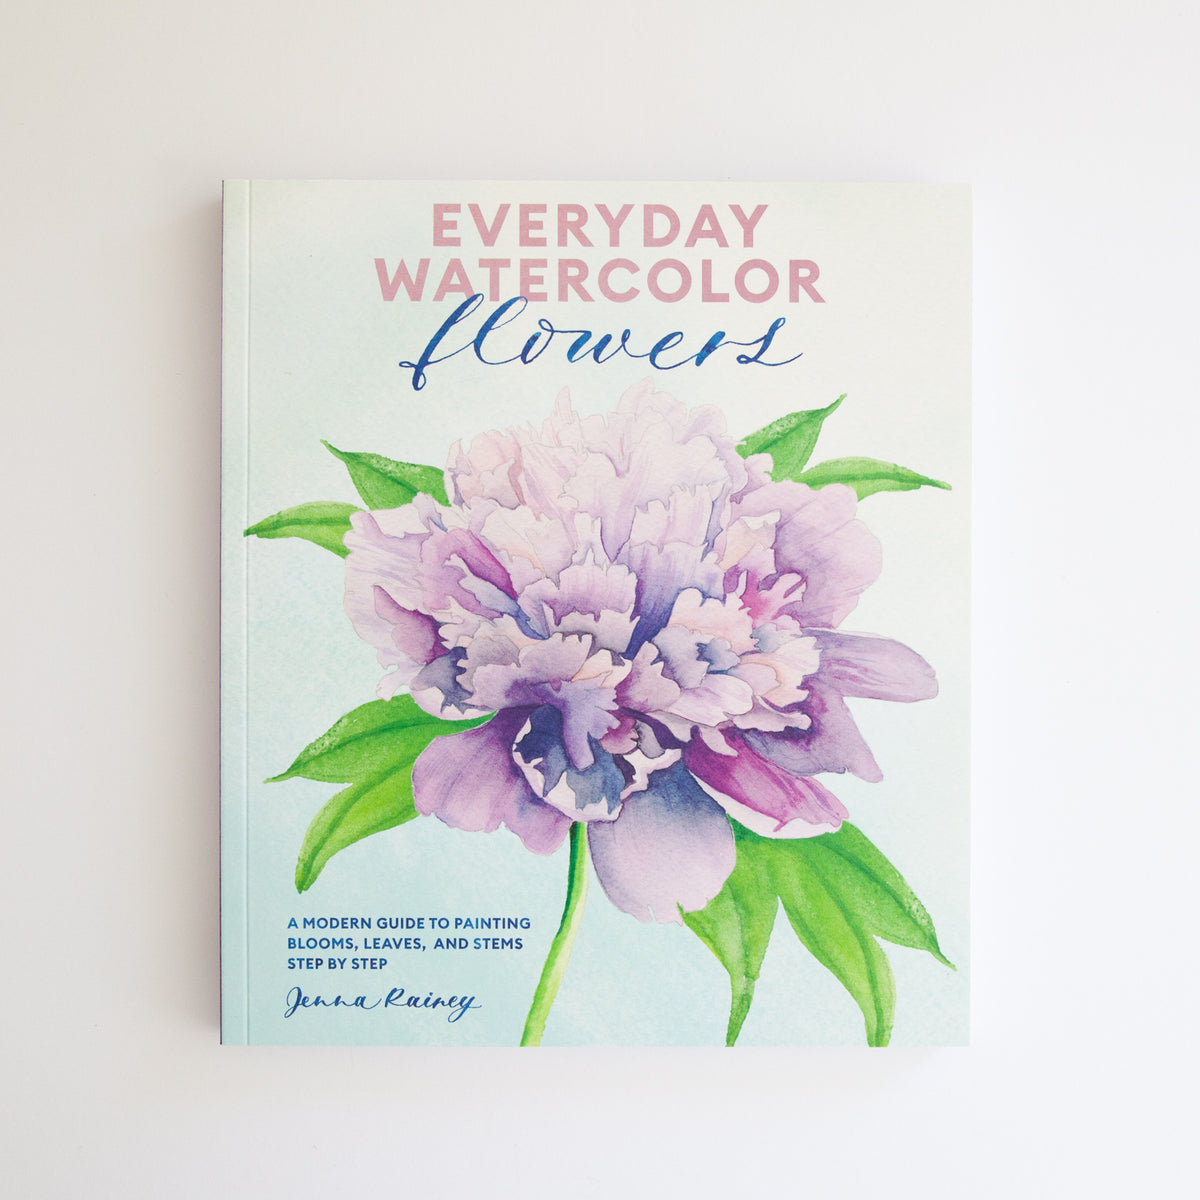 'Everyday Watercolor Flowers' by Jenna Rainey